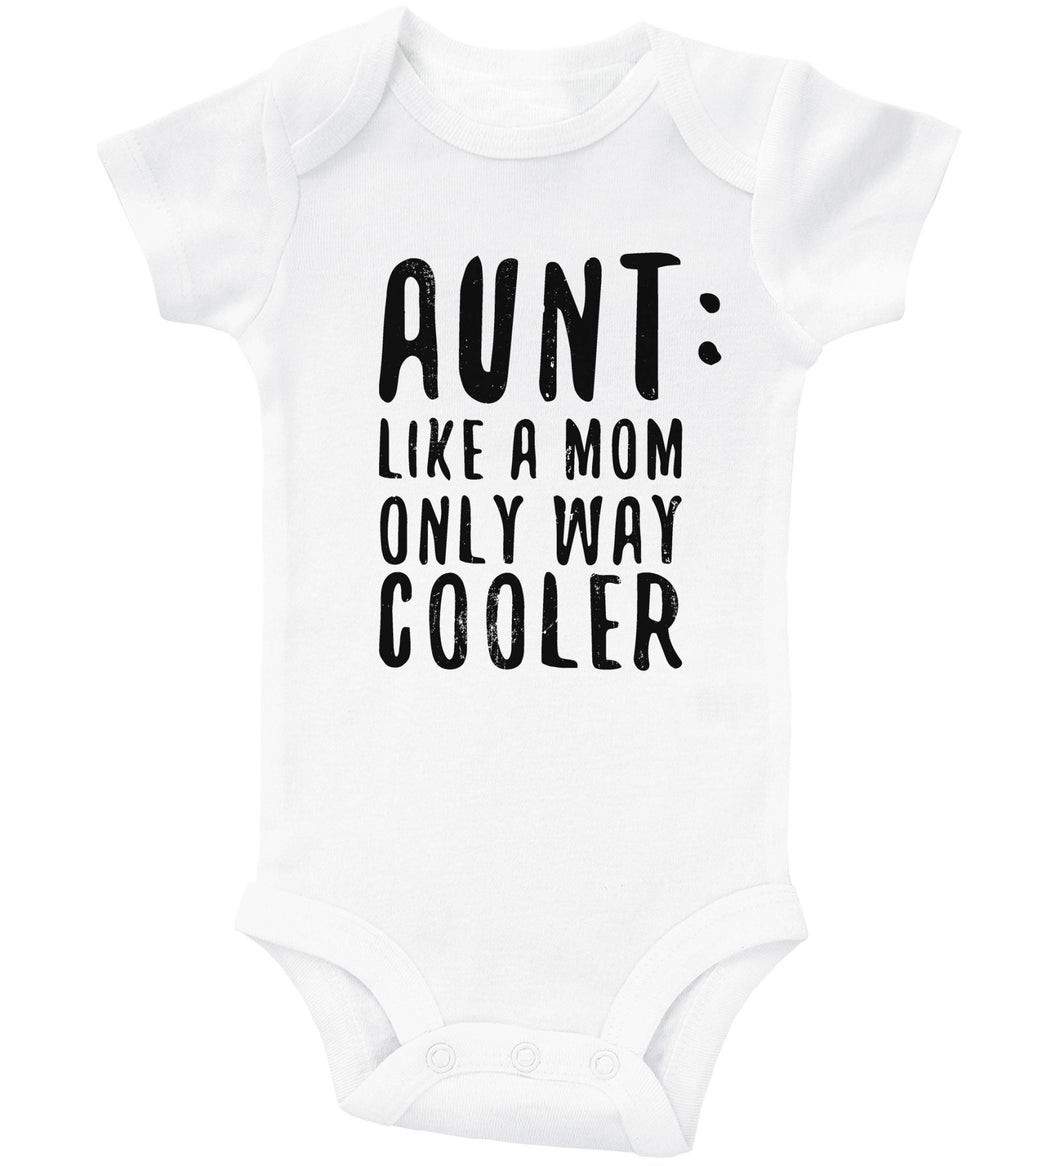 AUNT: LIKE A MOM ONLY WAY COOLER - Basic Onesie - Baffle